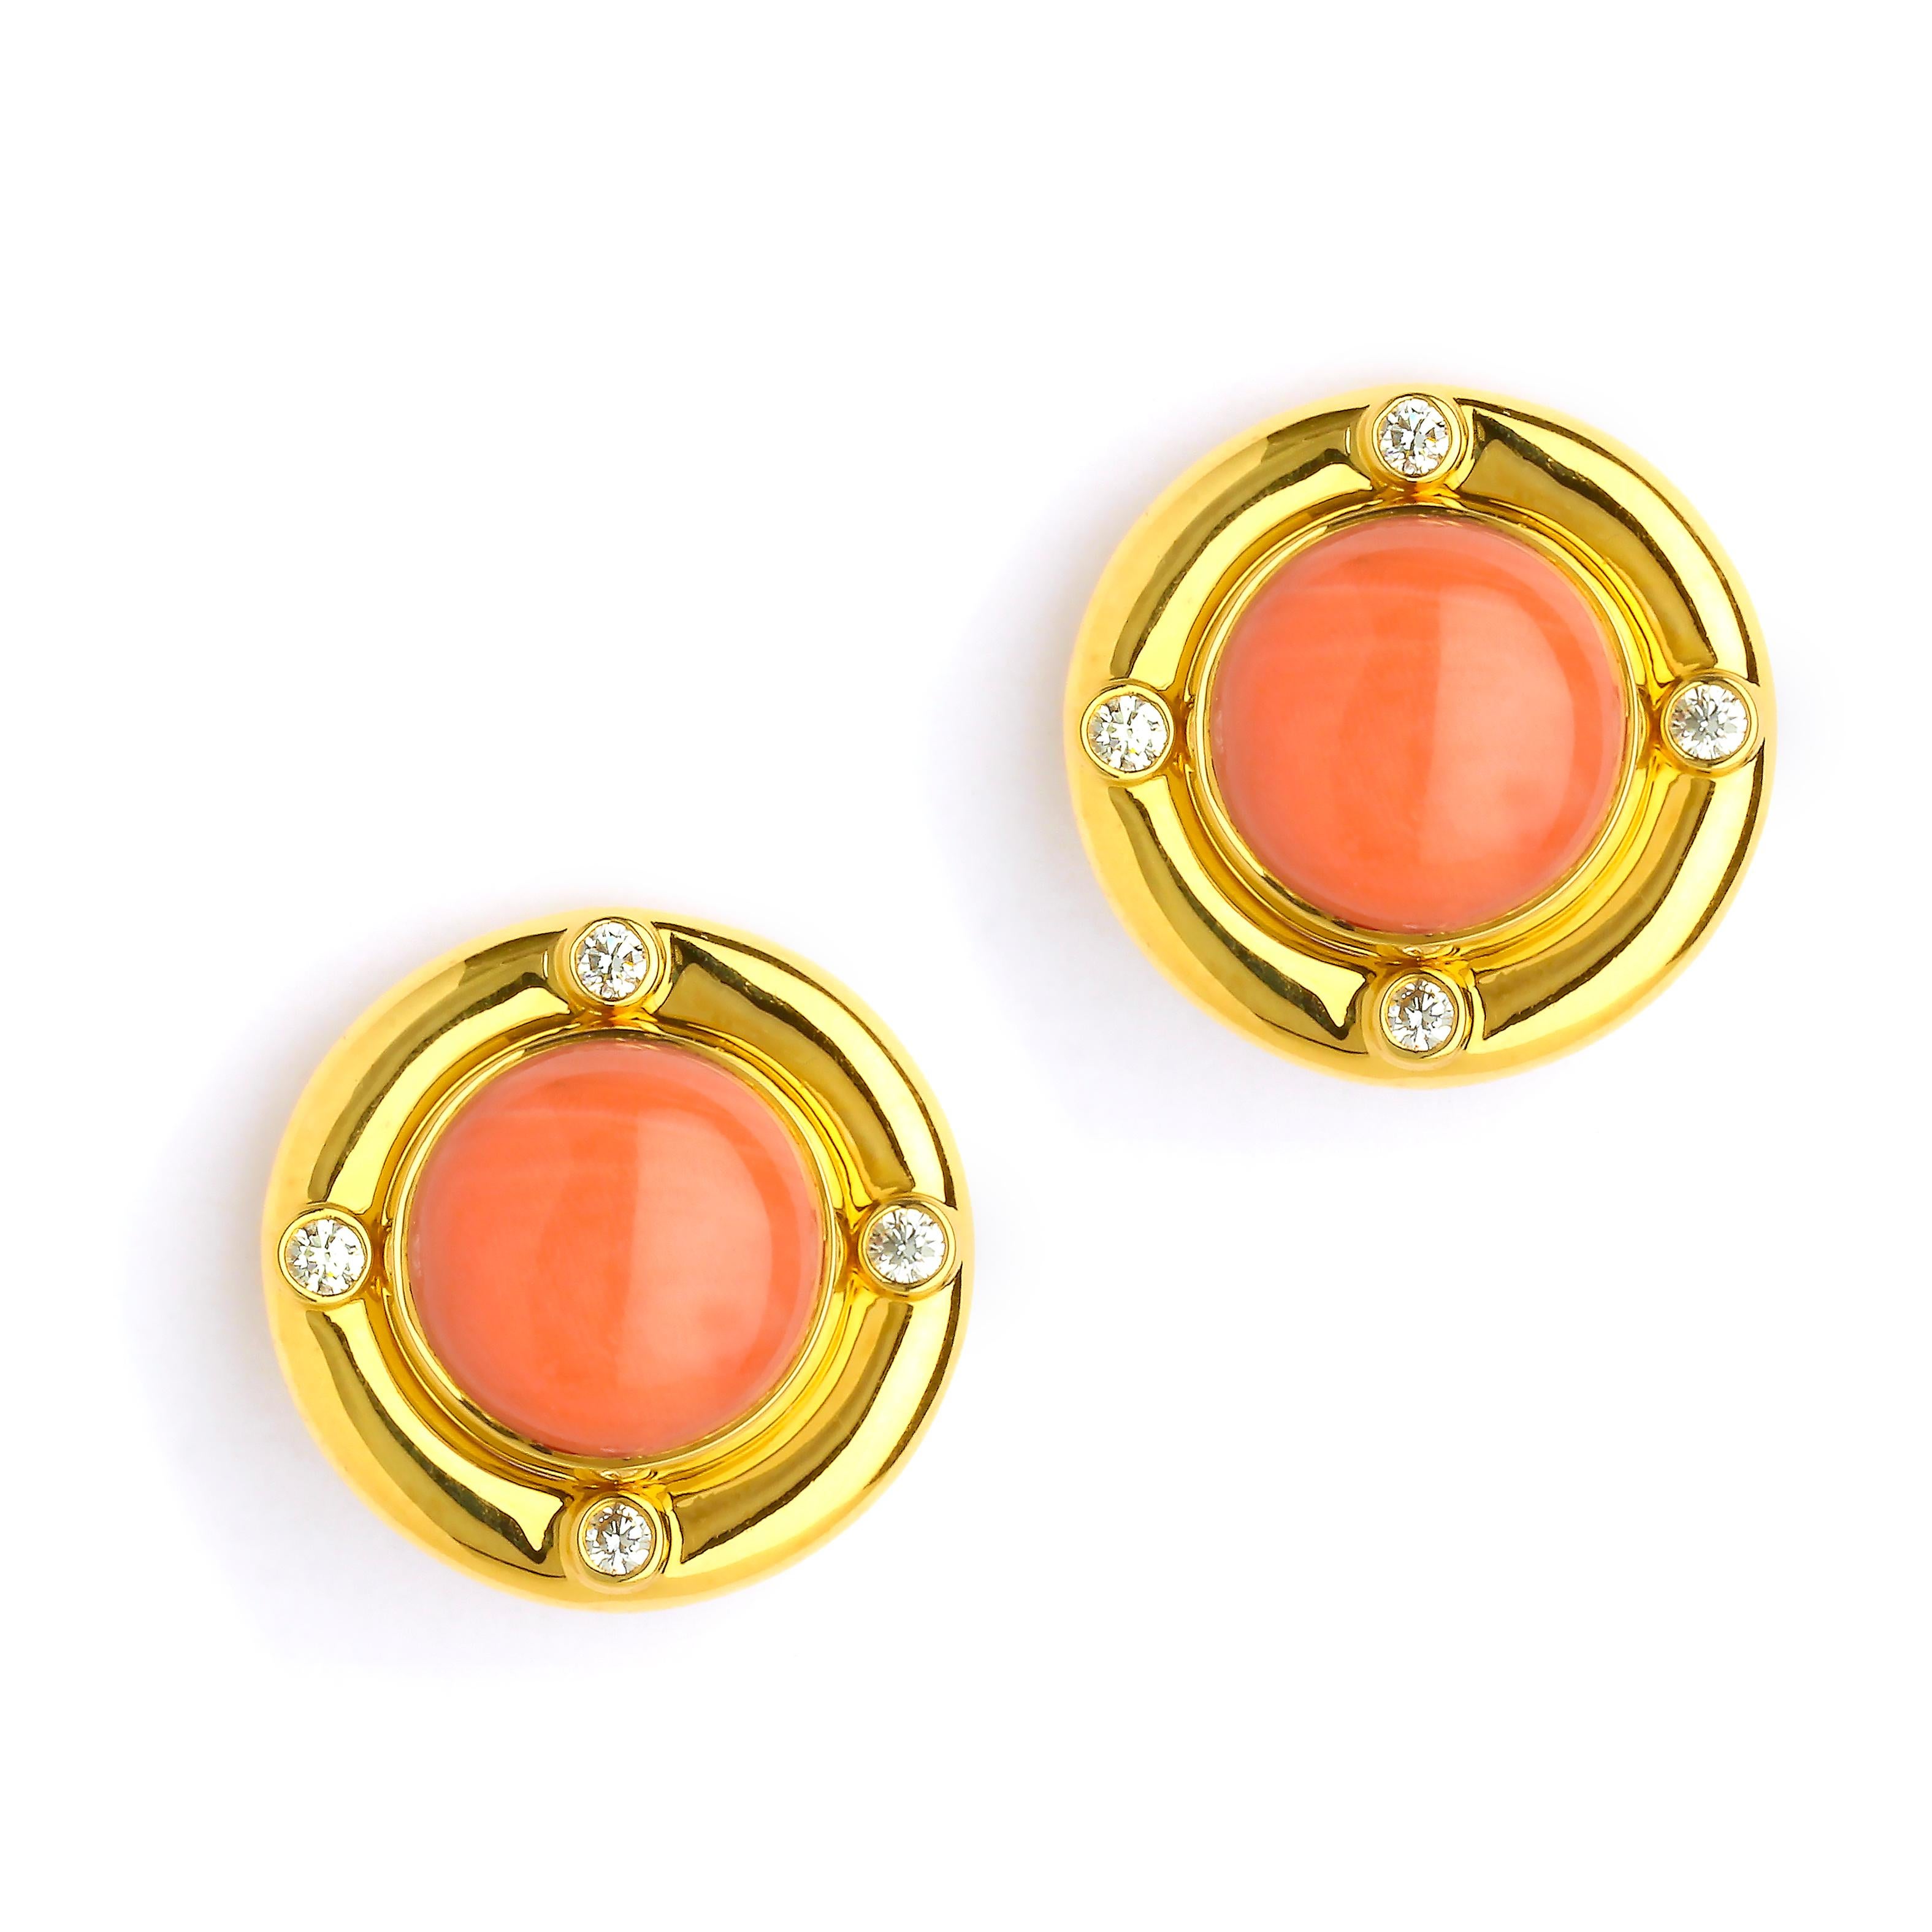 Syna Limited Edition Coral Yellow Gold Earrings with Diamonds